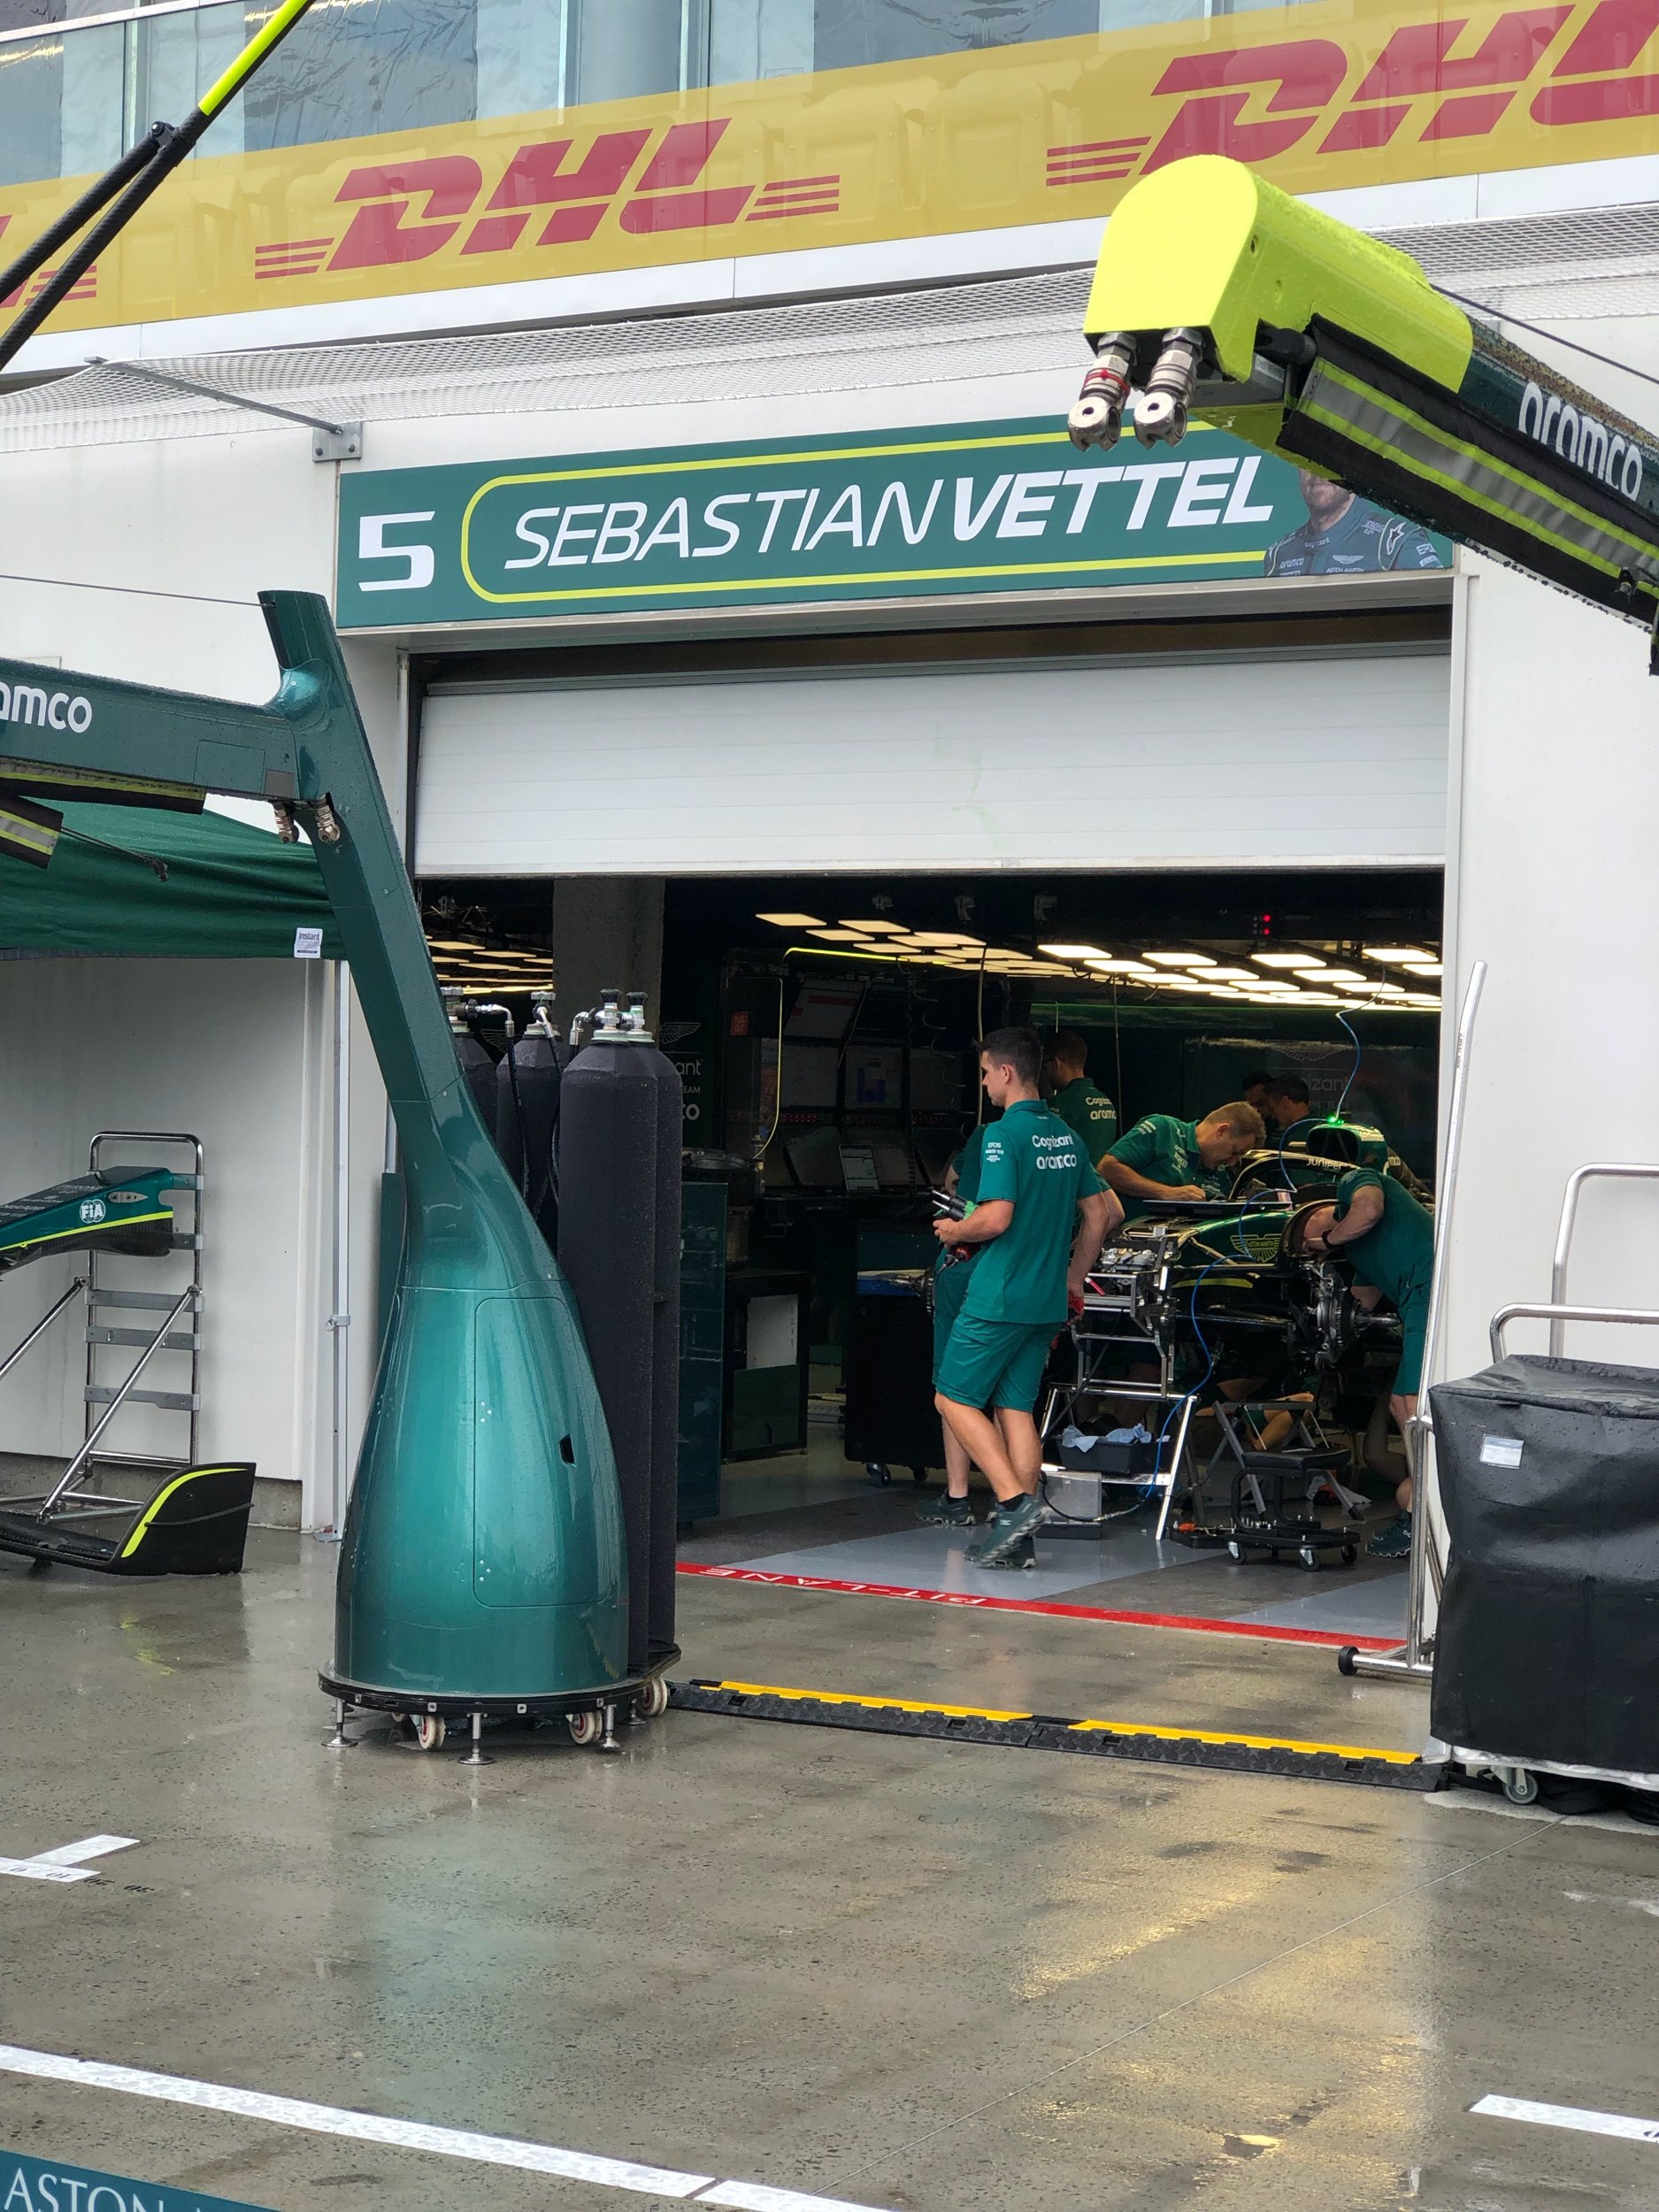  The Aston Martin garage. We saw Seb Vettel a couple of times, on his bike and in the pit lane. 